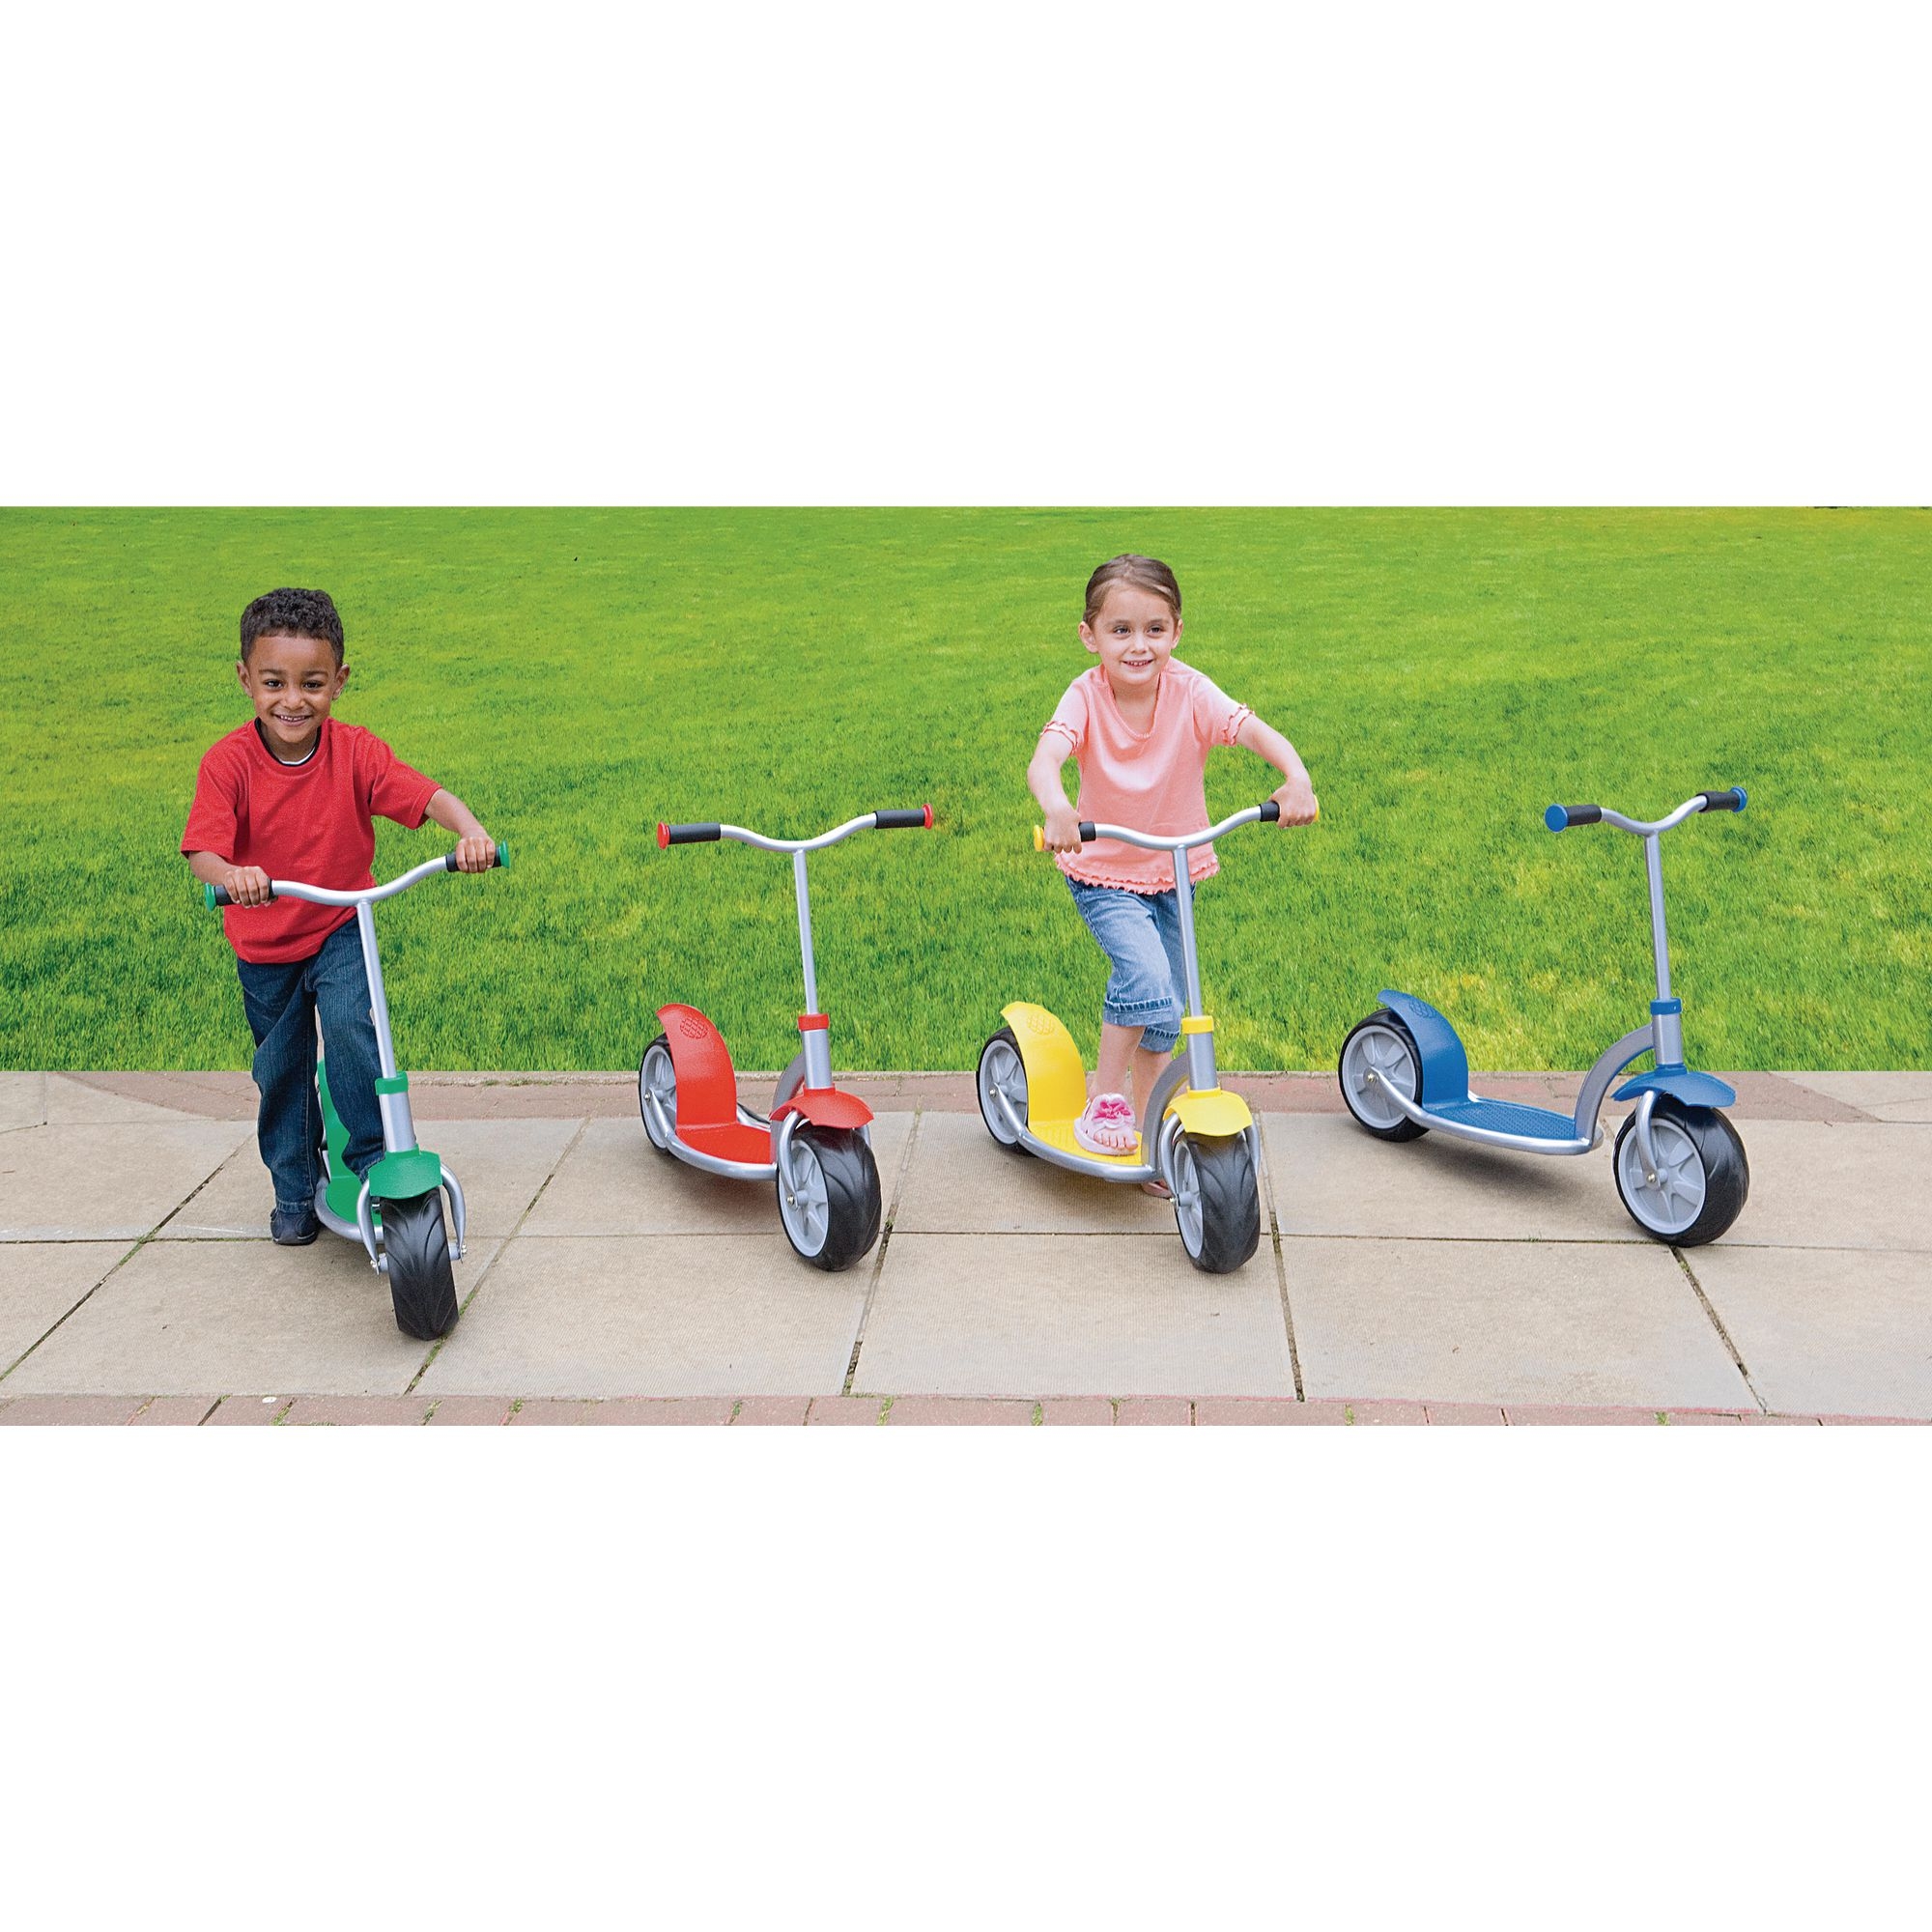 Scooters Multibuy Special Offer - Pack of 4